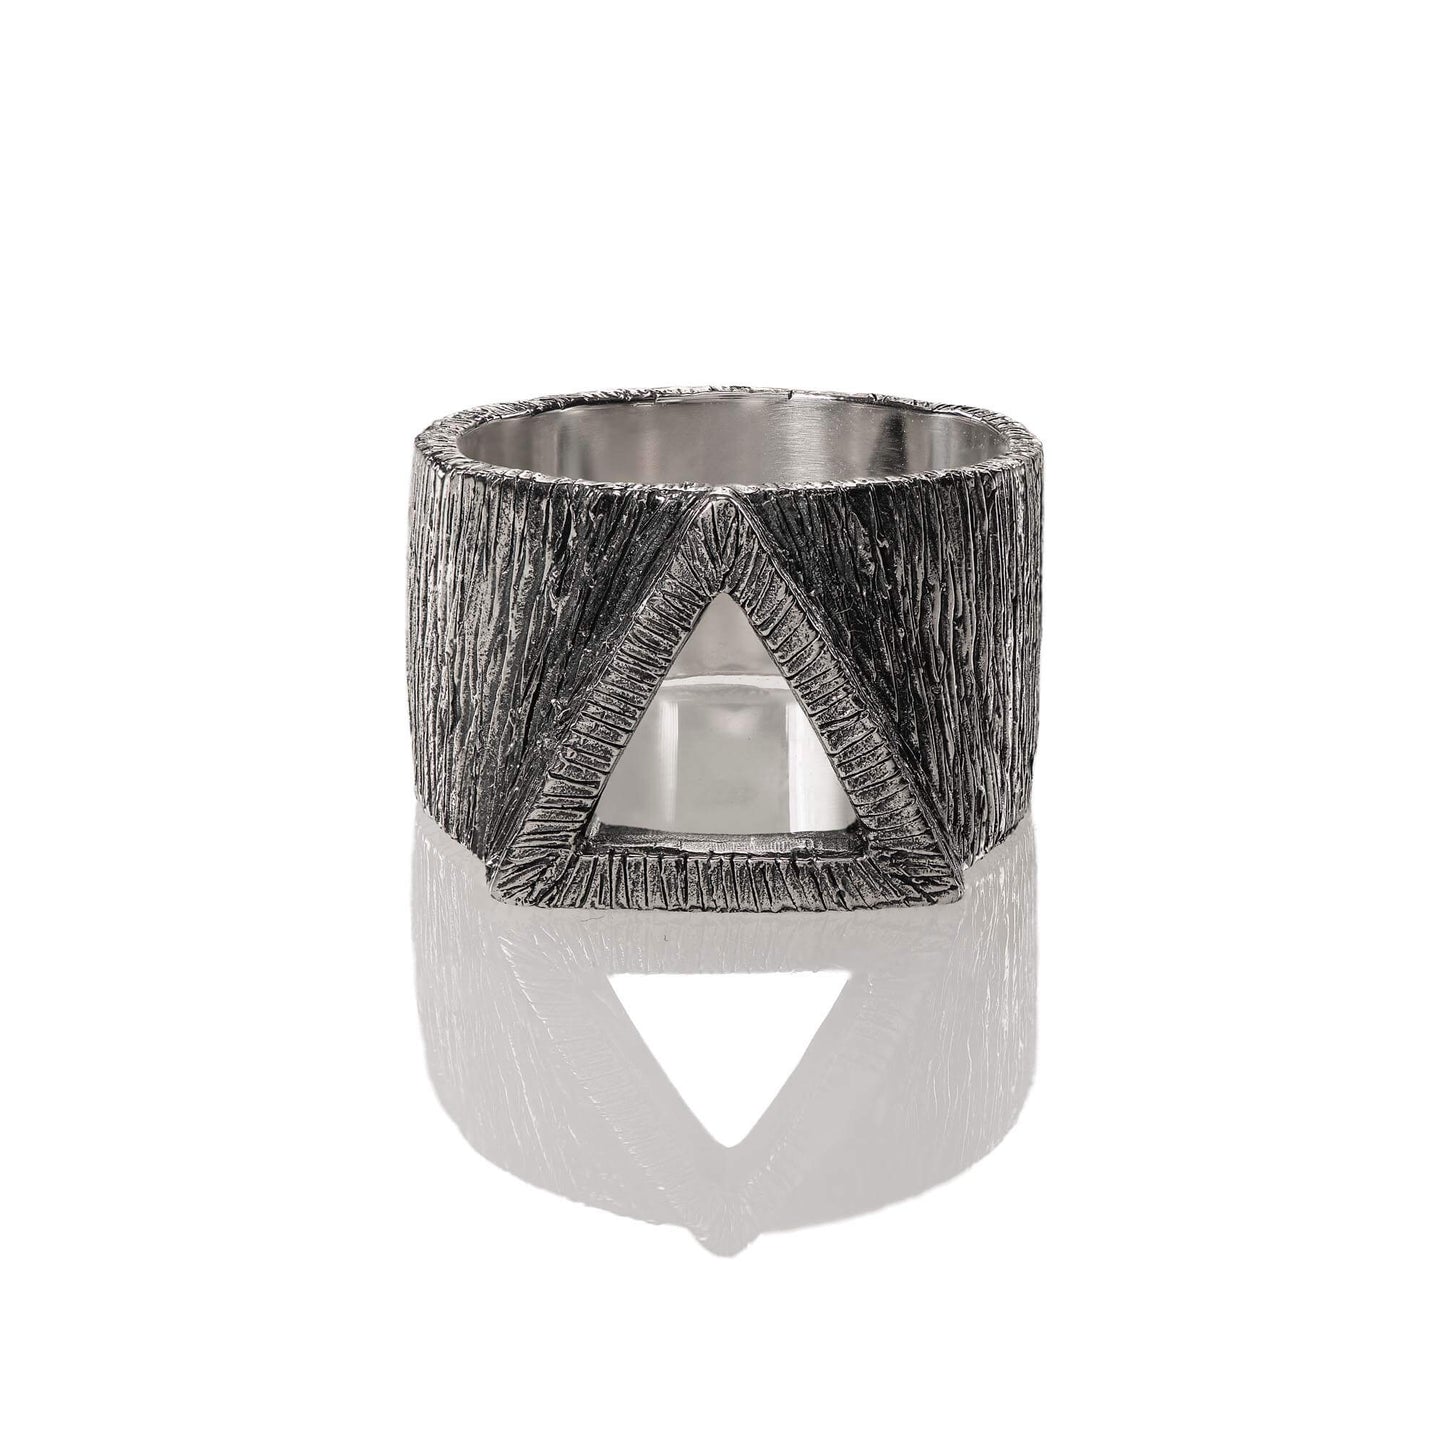 TRIANGLE RING. - 925 Silver Ring 17mm - PALM. | Handcrafted Jewelry-